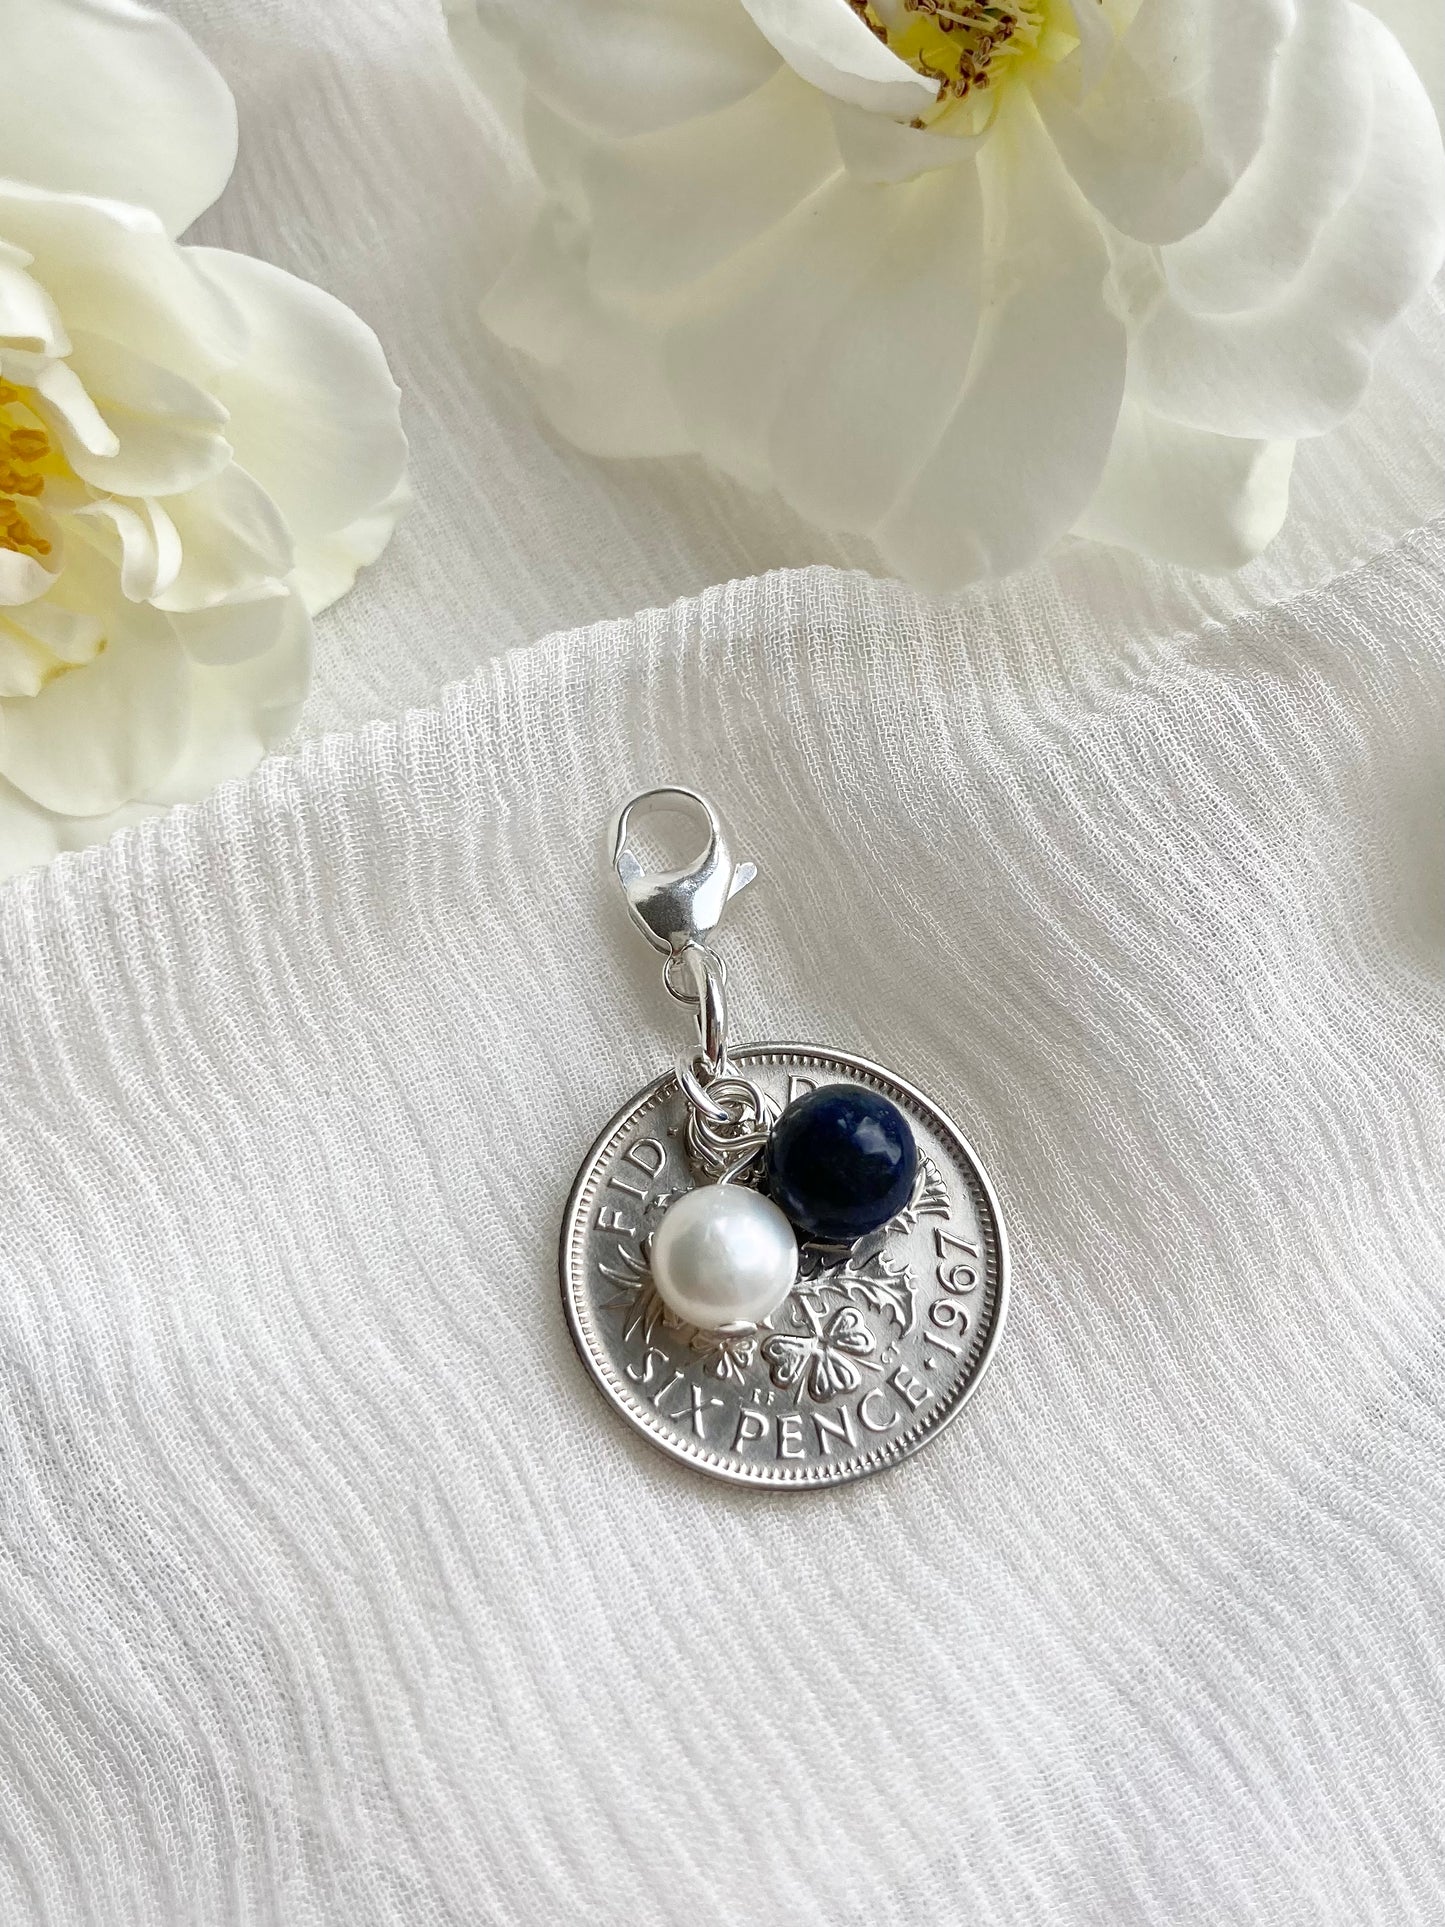 Something Old to Blue- Silver Sixpence Wedding Pin - Bridal Gift Something Old